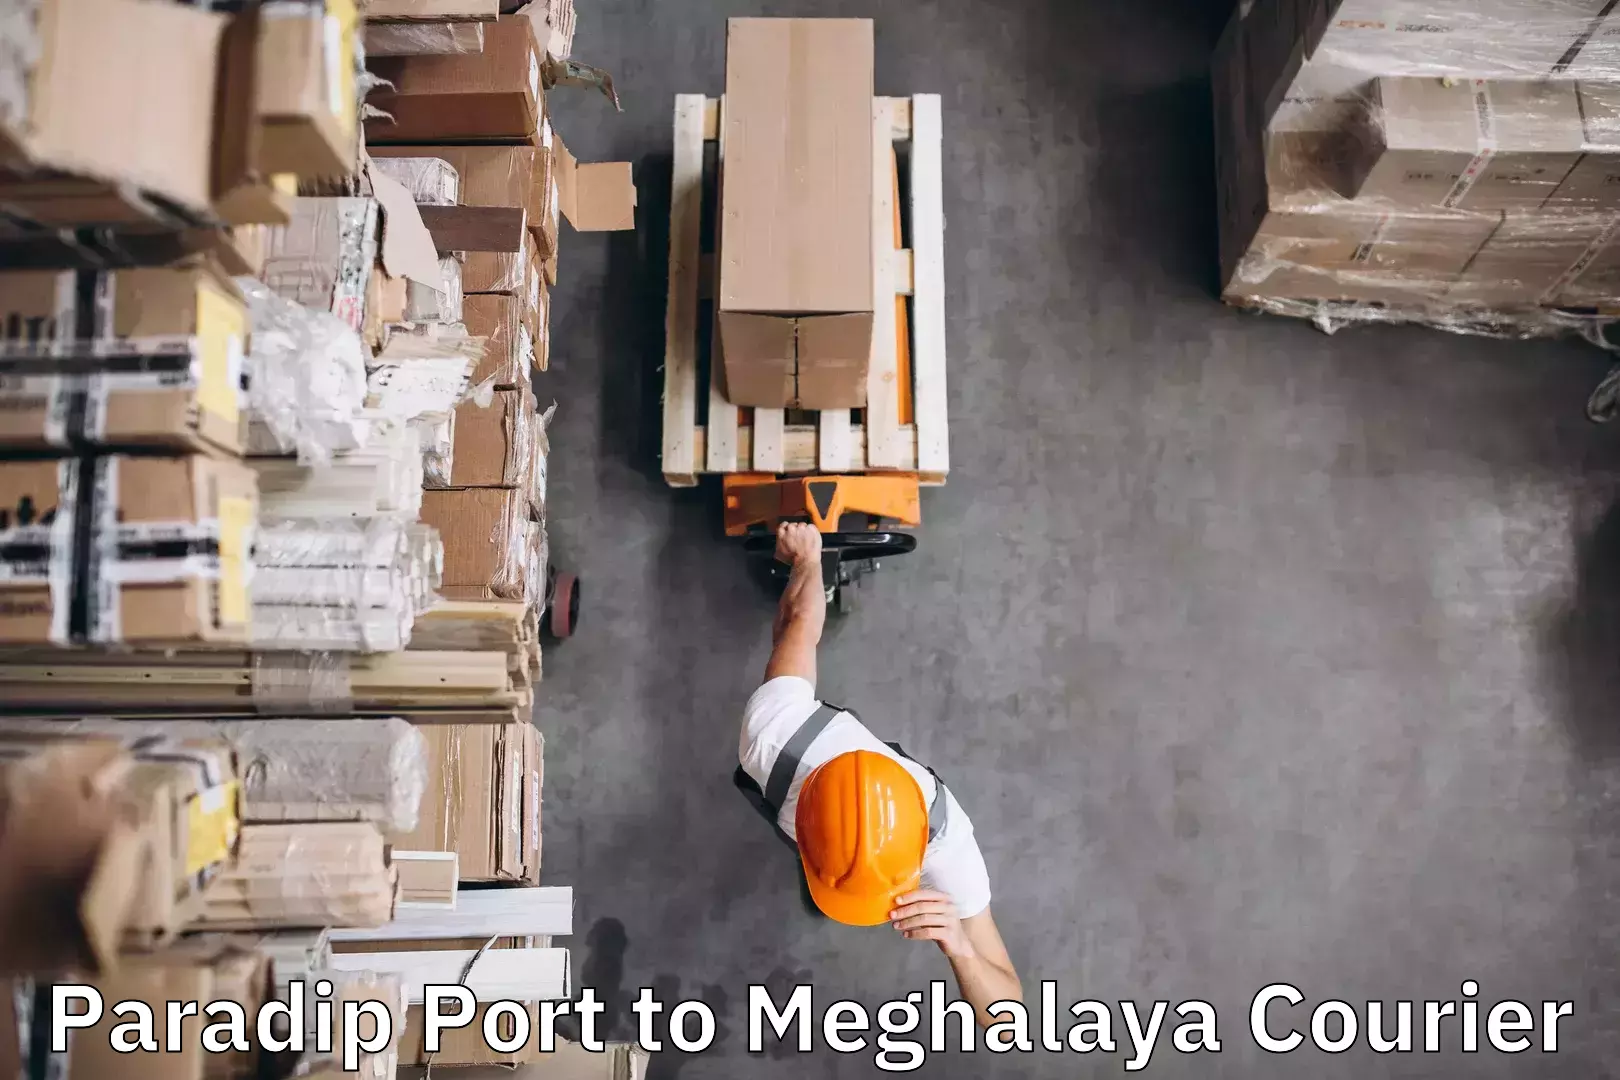 Luggage delivery providers Paradip Port to Marshillong